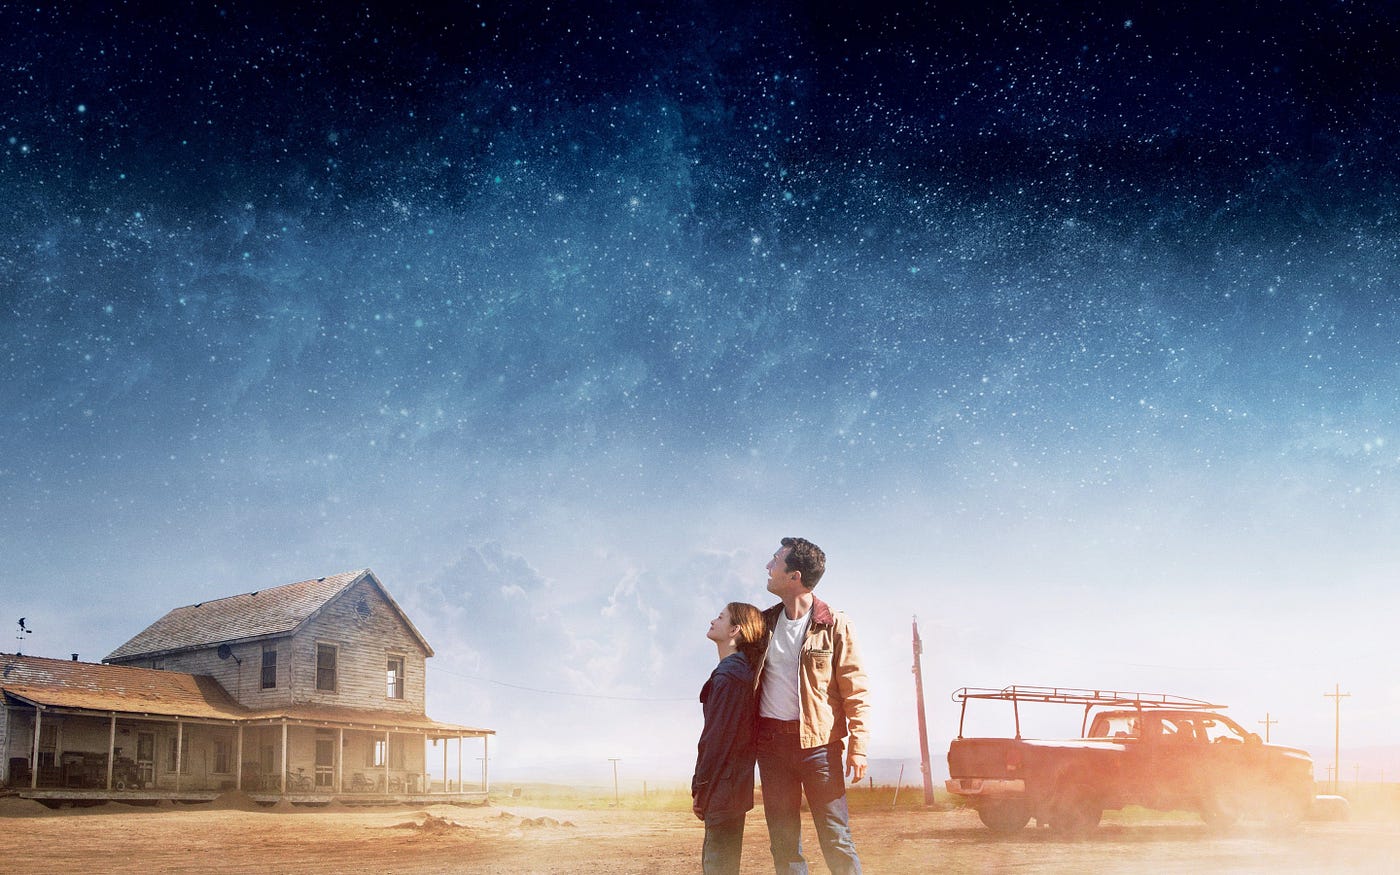 3 Powerful Life Lessons from the Movie Interstellar | by Tingyo Tan | Medium